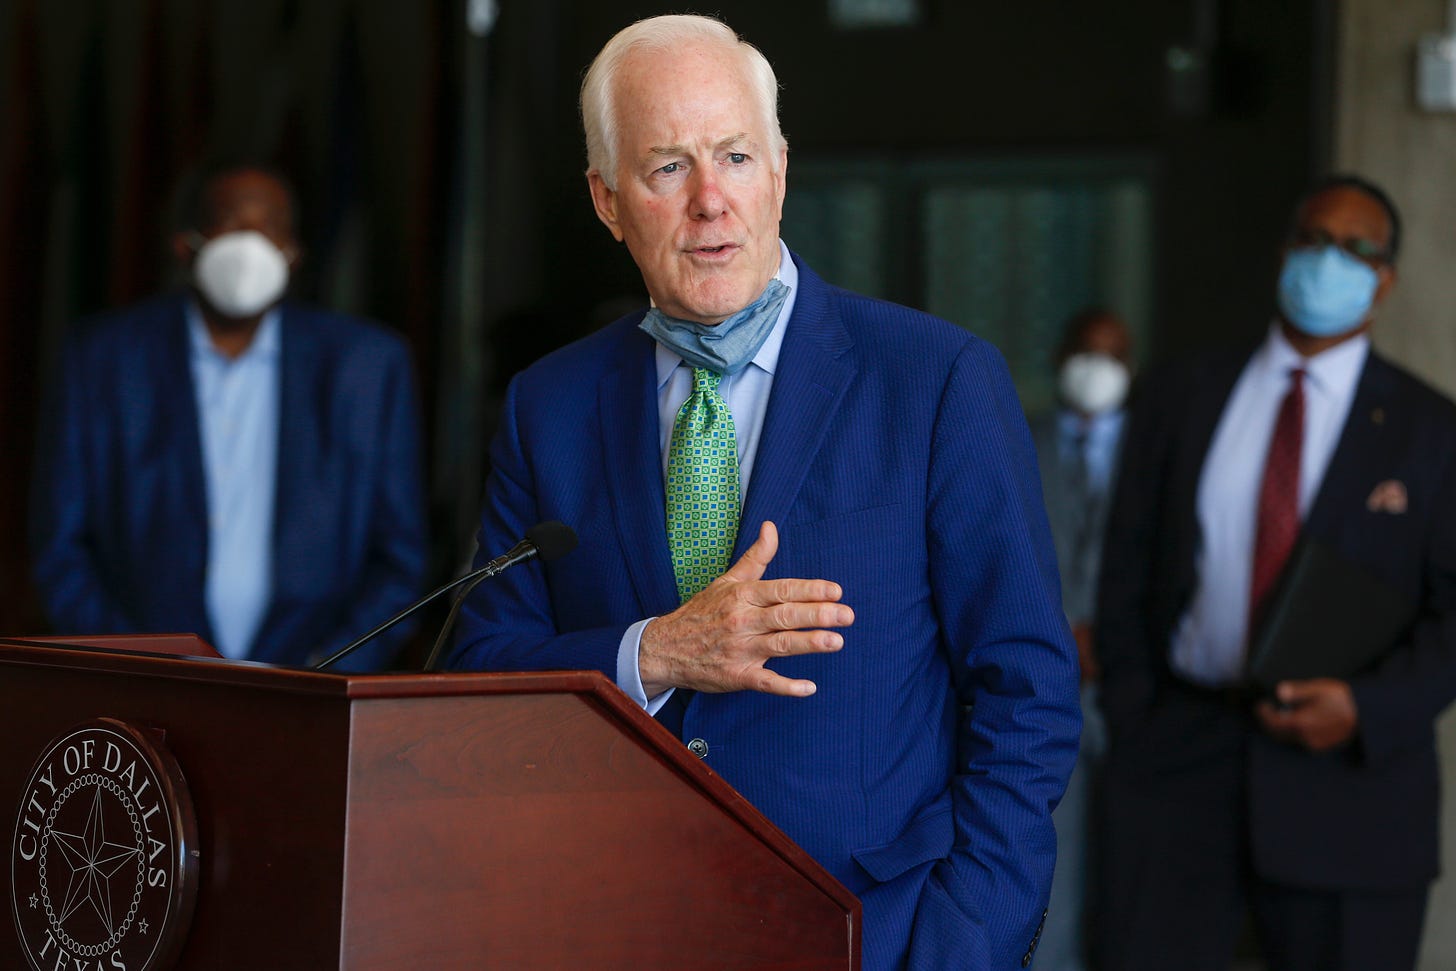 What you need to know about Sen. John Cornyn and the Affordable Care Act